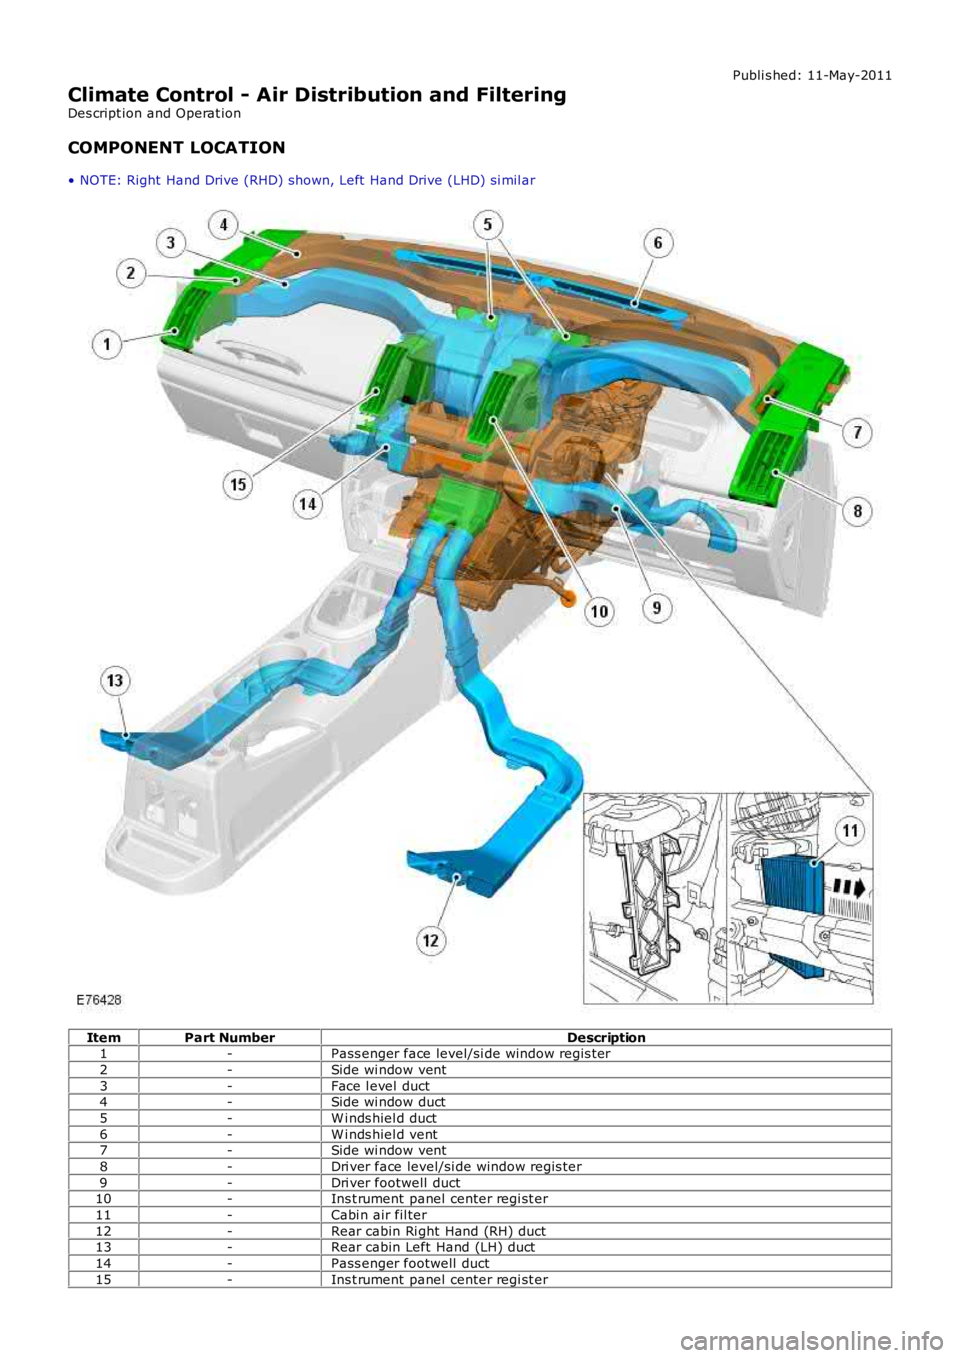 LAND ROVER FRELANDER 2 2006  Repair Manual Publi s hed: 11-May-2011
Climate Control - Air Distribution and Filtering
Des cript ion and Operat ion
COMPONENT LOCATION
• NOTE: Right  Hand Drive (RHD) shown, Left  Hand Drive (LHD) si mil ar
Item